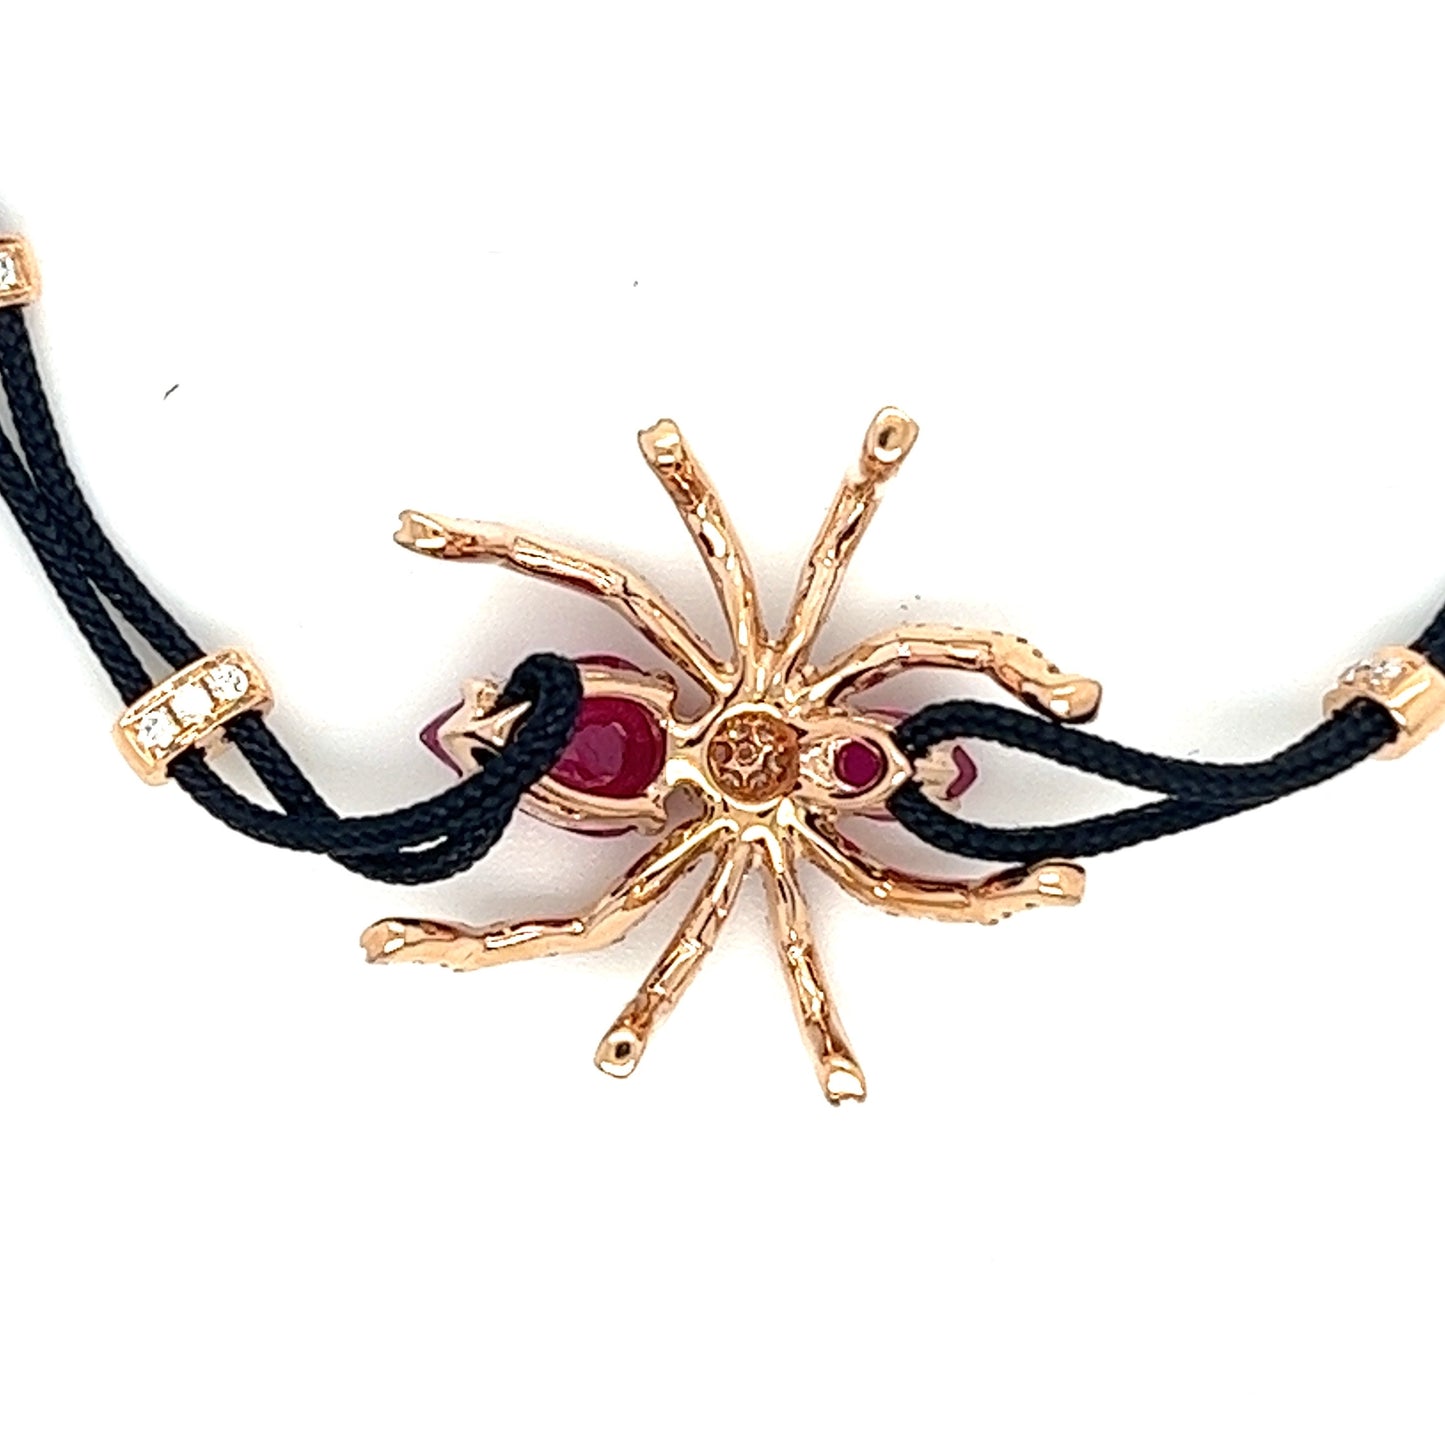 18K Rose Gold Spider Bracelet with Rubies and Diamonds